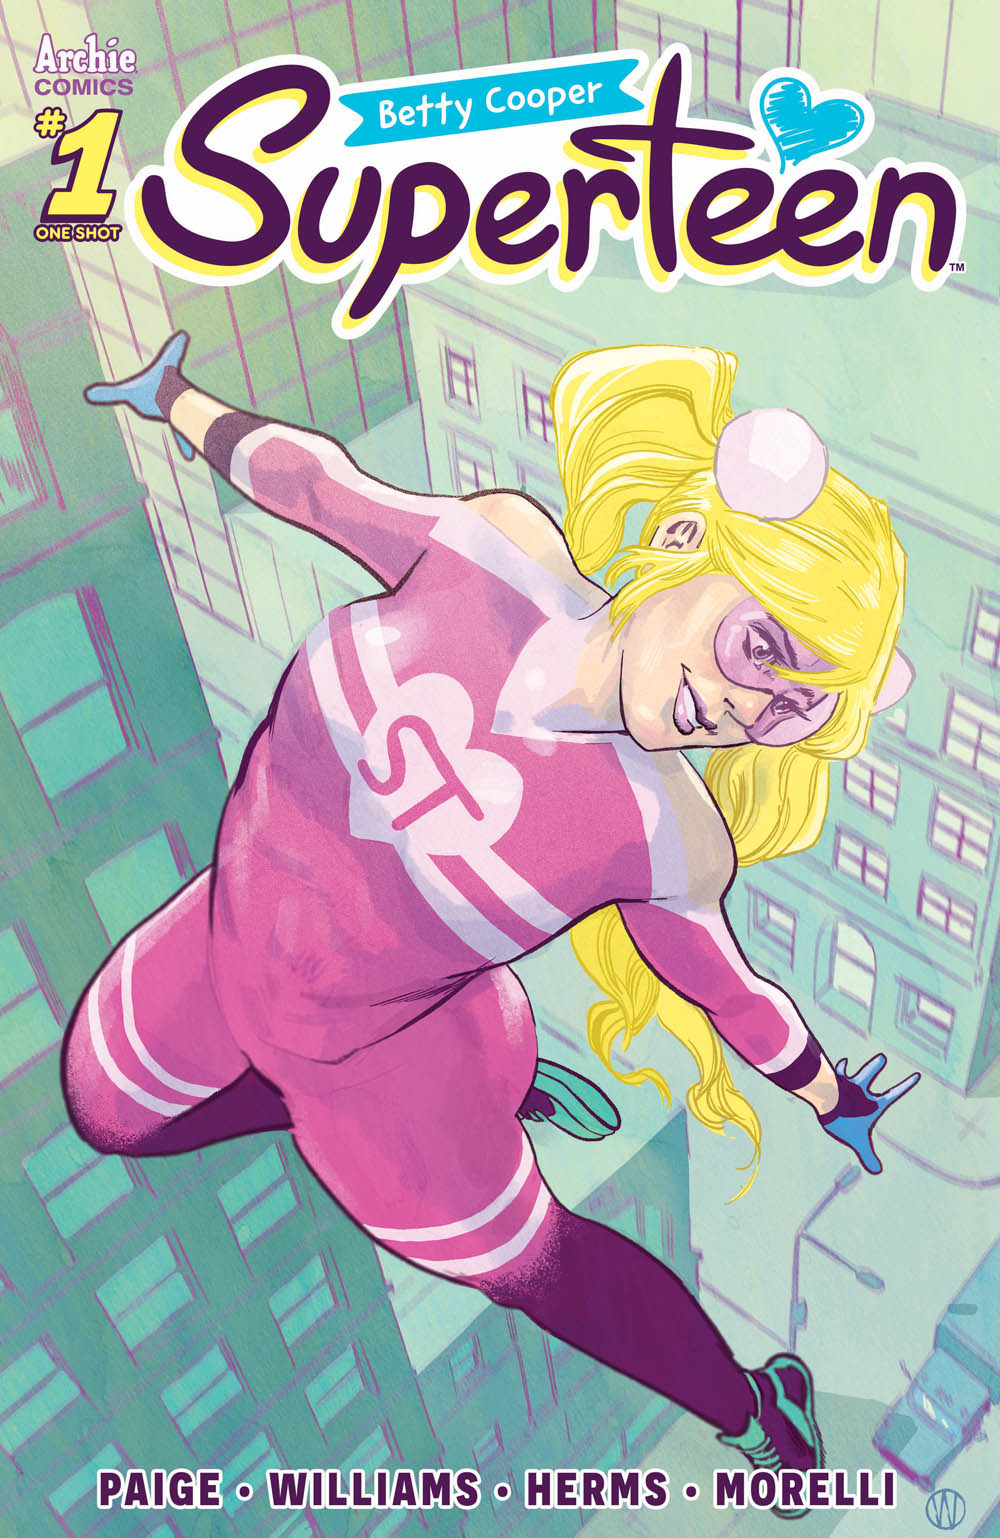 A classic Archie superhero returns to duty in BETTY COOPER: SUPERTEEN #1 by  Danielle Paige and Brittney Williams! - Archie Comics